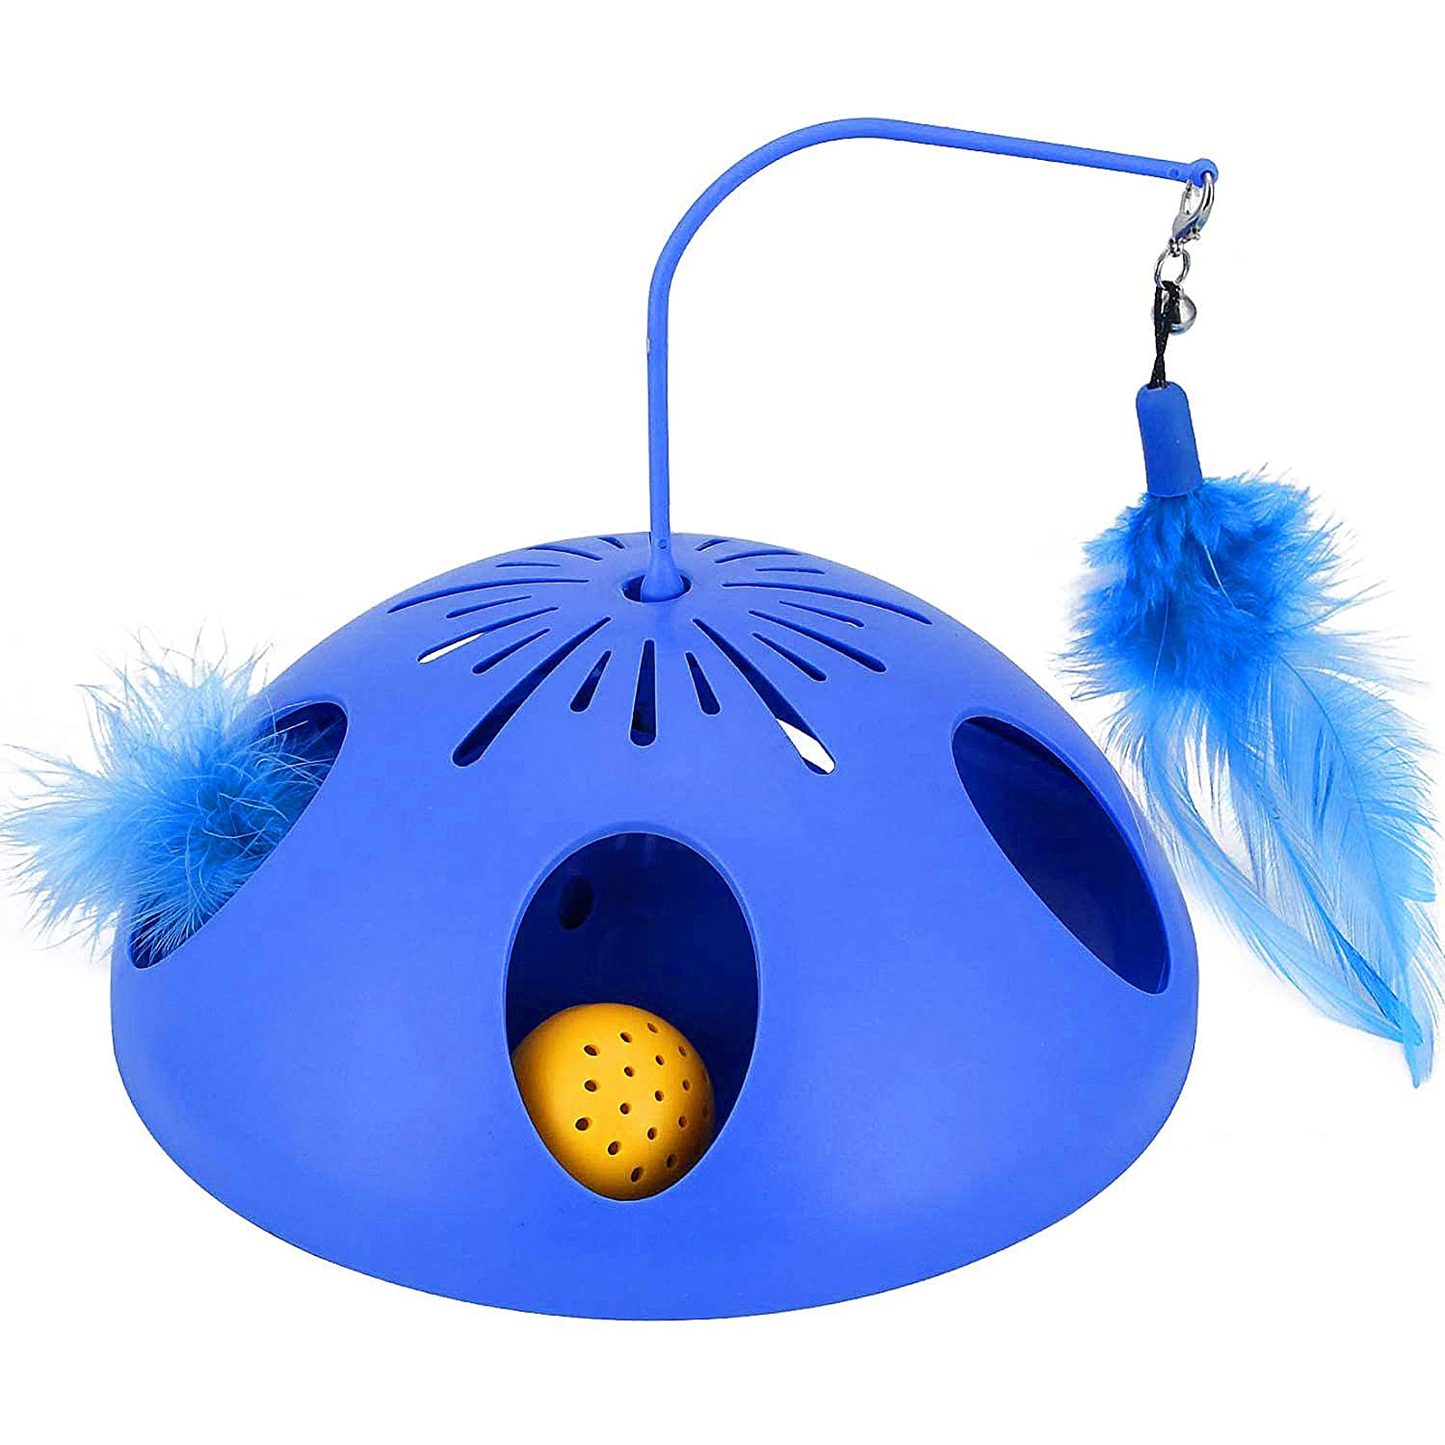 NEW! Electronic Smart Motion Cat Toy